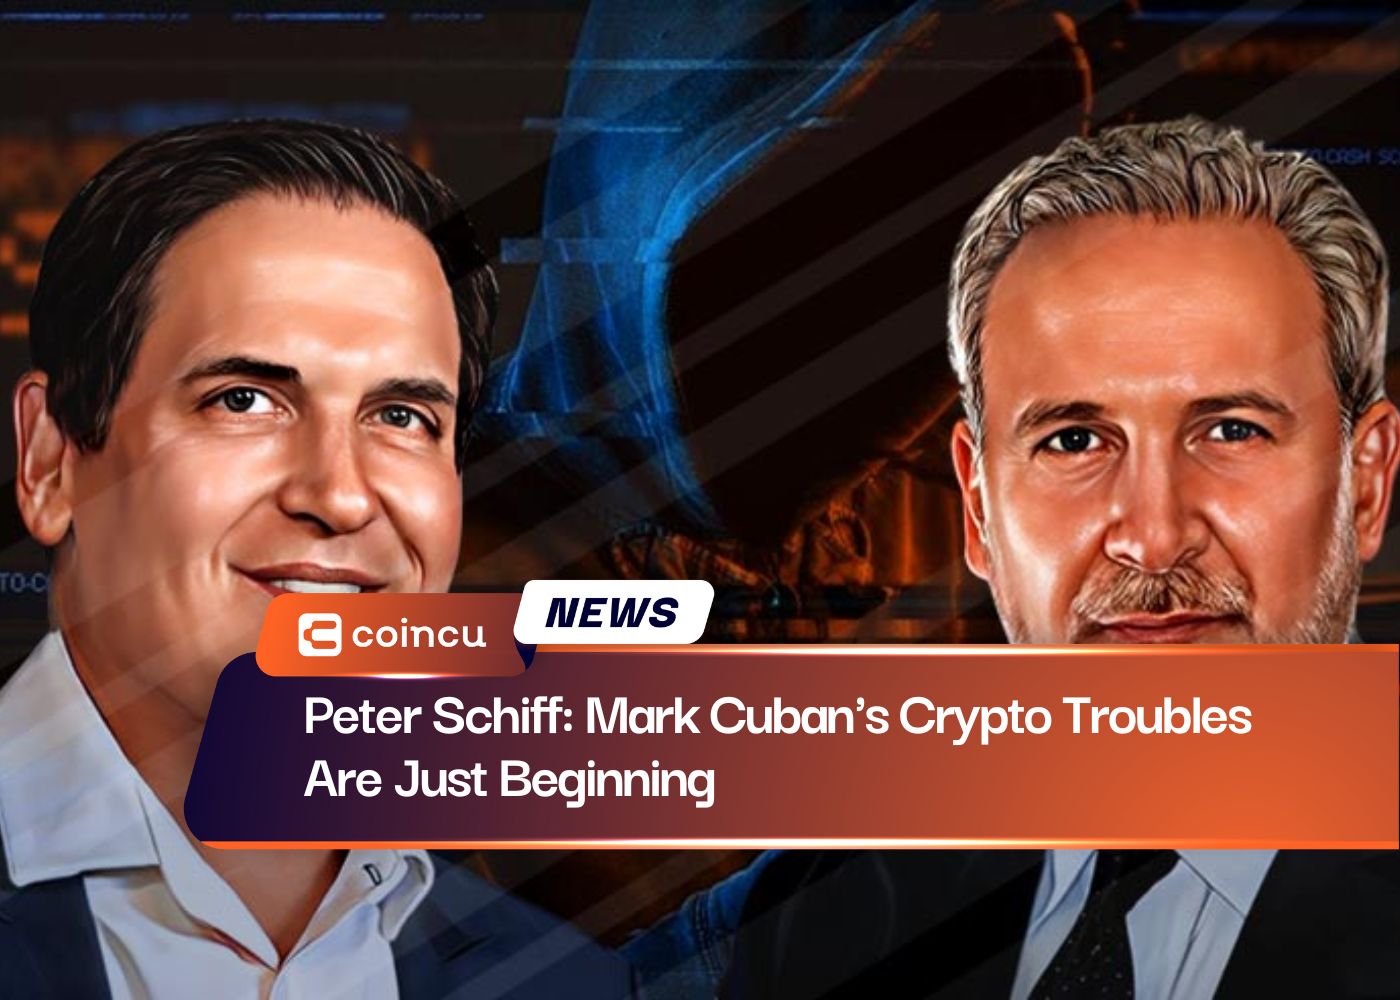 Peter Schiff: Mark Cuban's Crypto Troubles Are Just Beginning